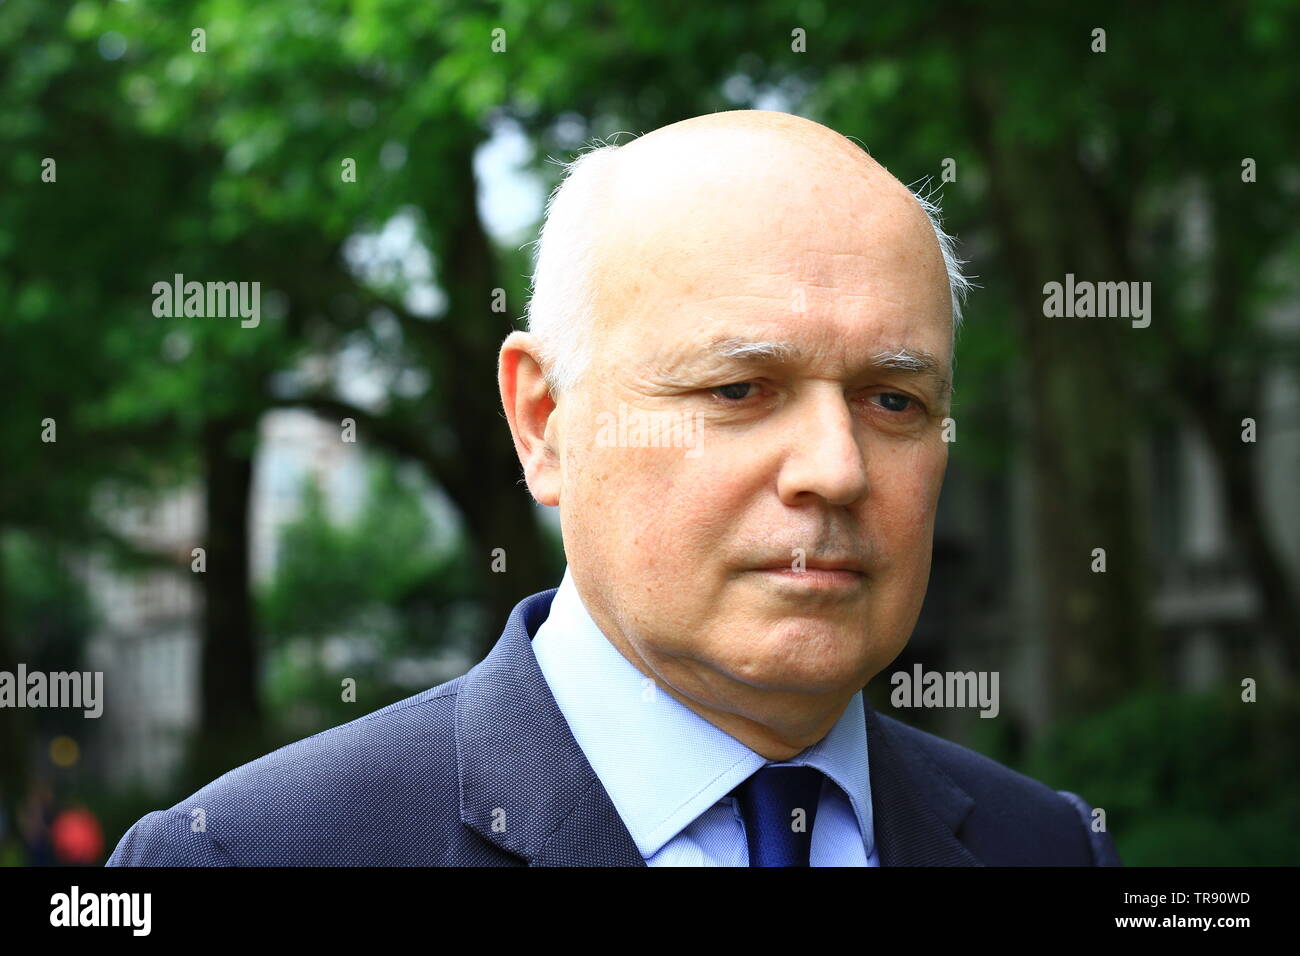 IAIN DUNCAN SMITH IN WESTMINSTER ON THE 30TH MAY 2019. IDS. CONSERVATIVE PARTY POLITICIANS. BRITISH POLITICIANS. UK POLITICS. POLITICING. POLITICS. MINISTERS. LEADERS. CONSERVATIVE AND UNION PARTY. TORY PARTY. TORIES. Stock Photo